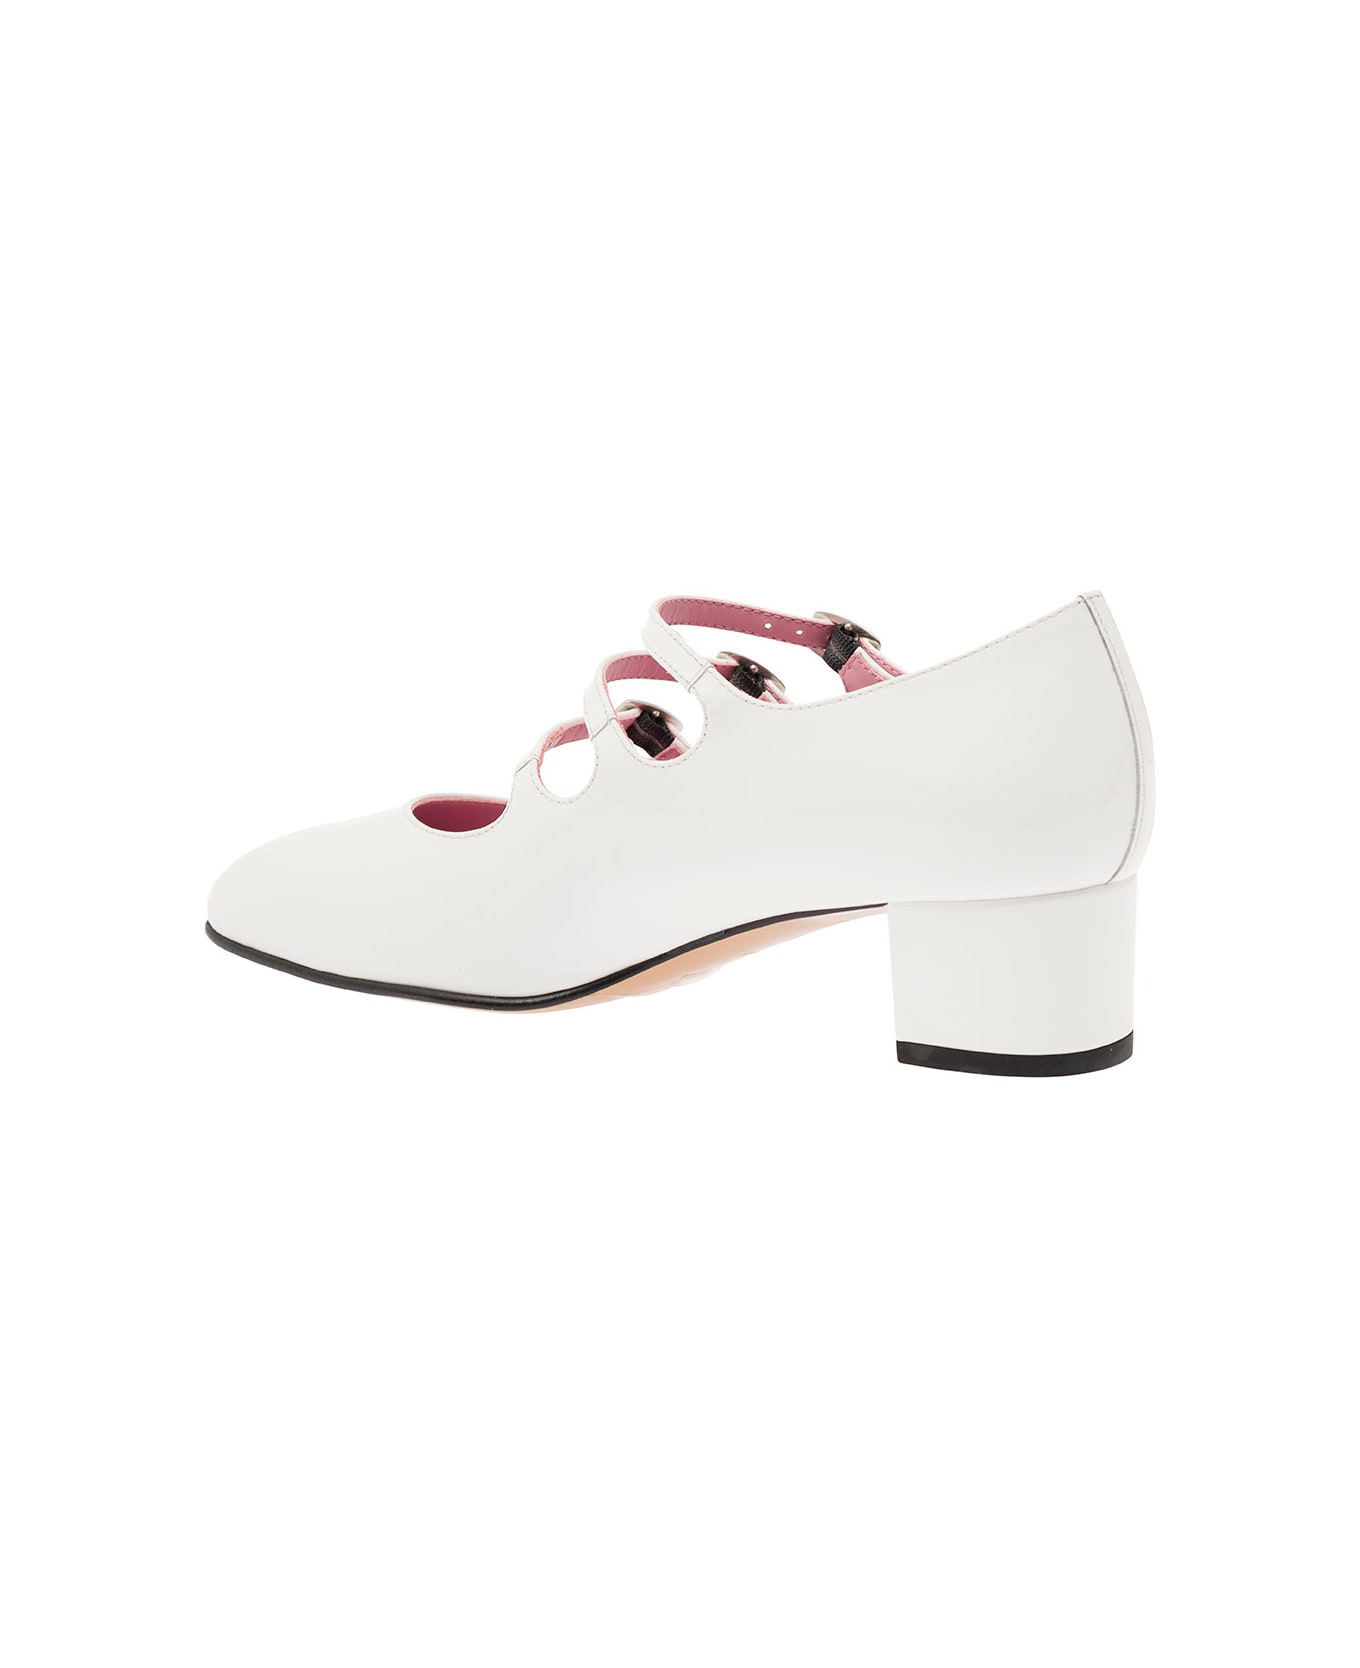 Carel 'kina' White Mary Janes With Straps And Block Heel In Patent Leather Woman - White